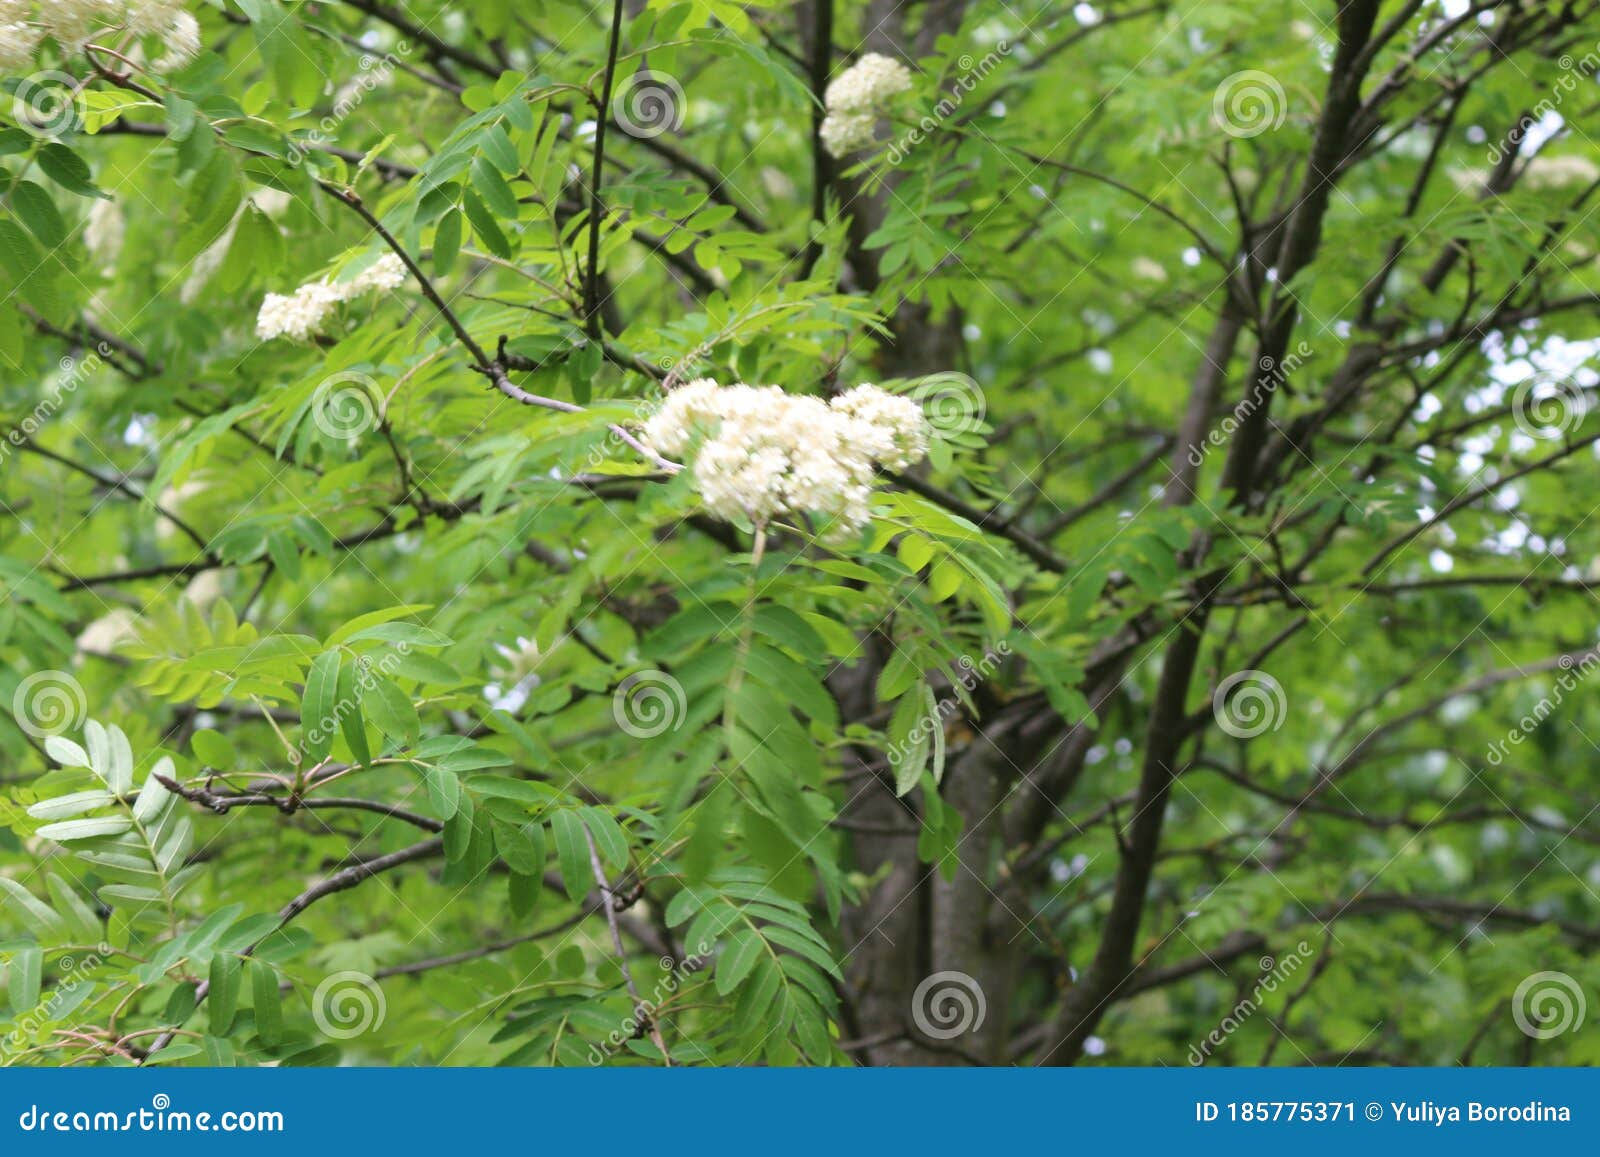 White Small Flowers Blossomed on a Mountain Ash Tree with a Basket of ...